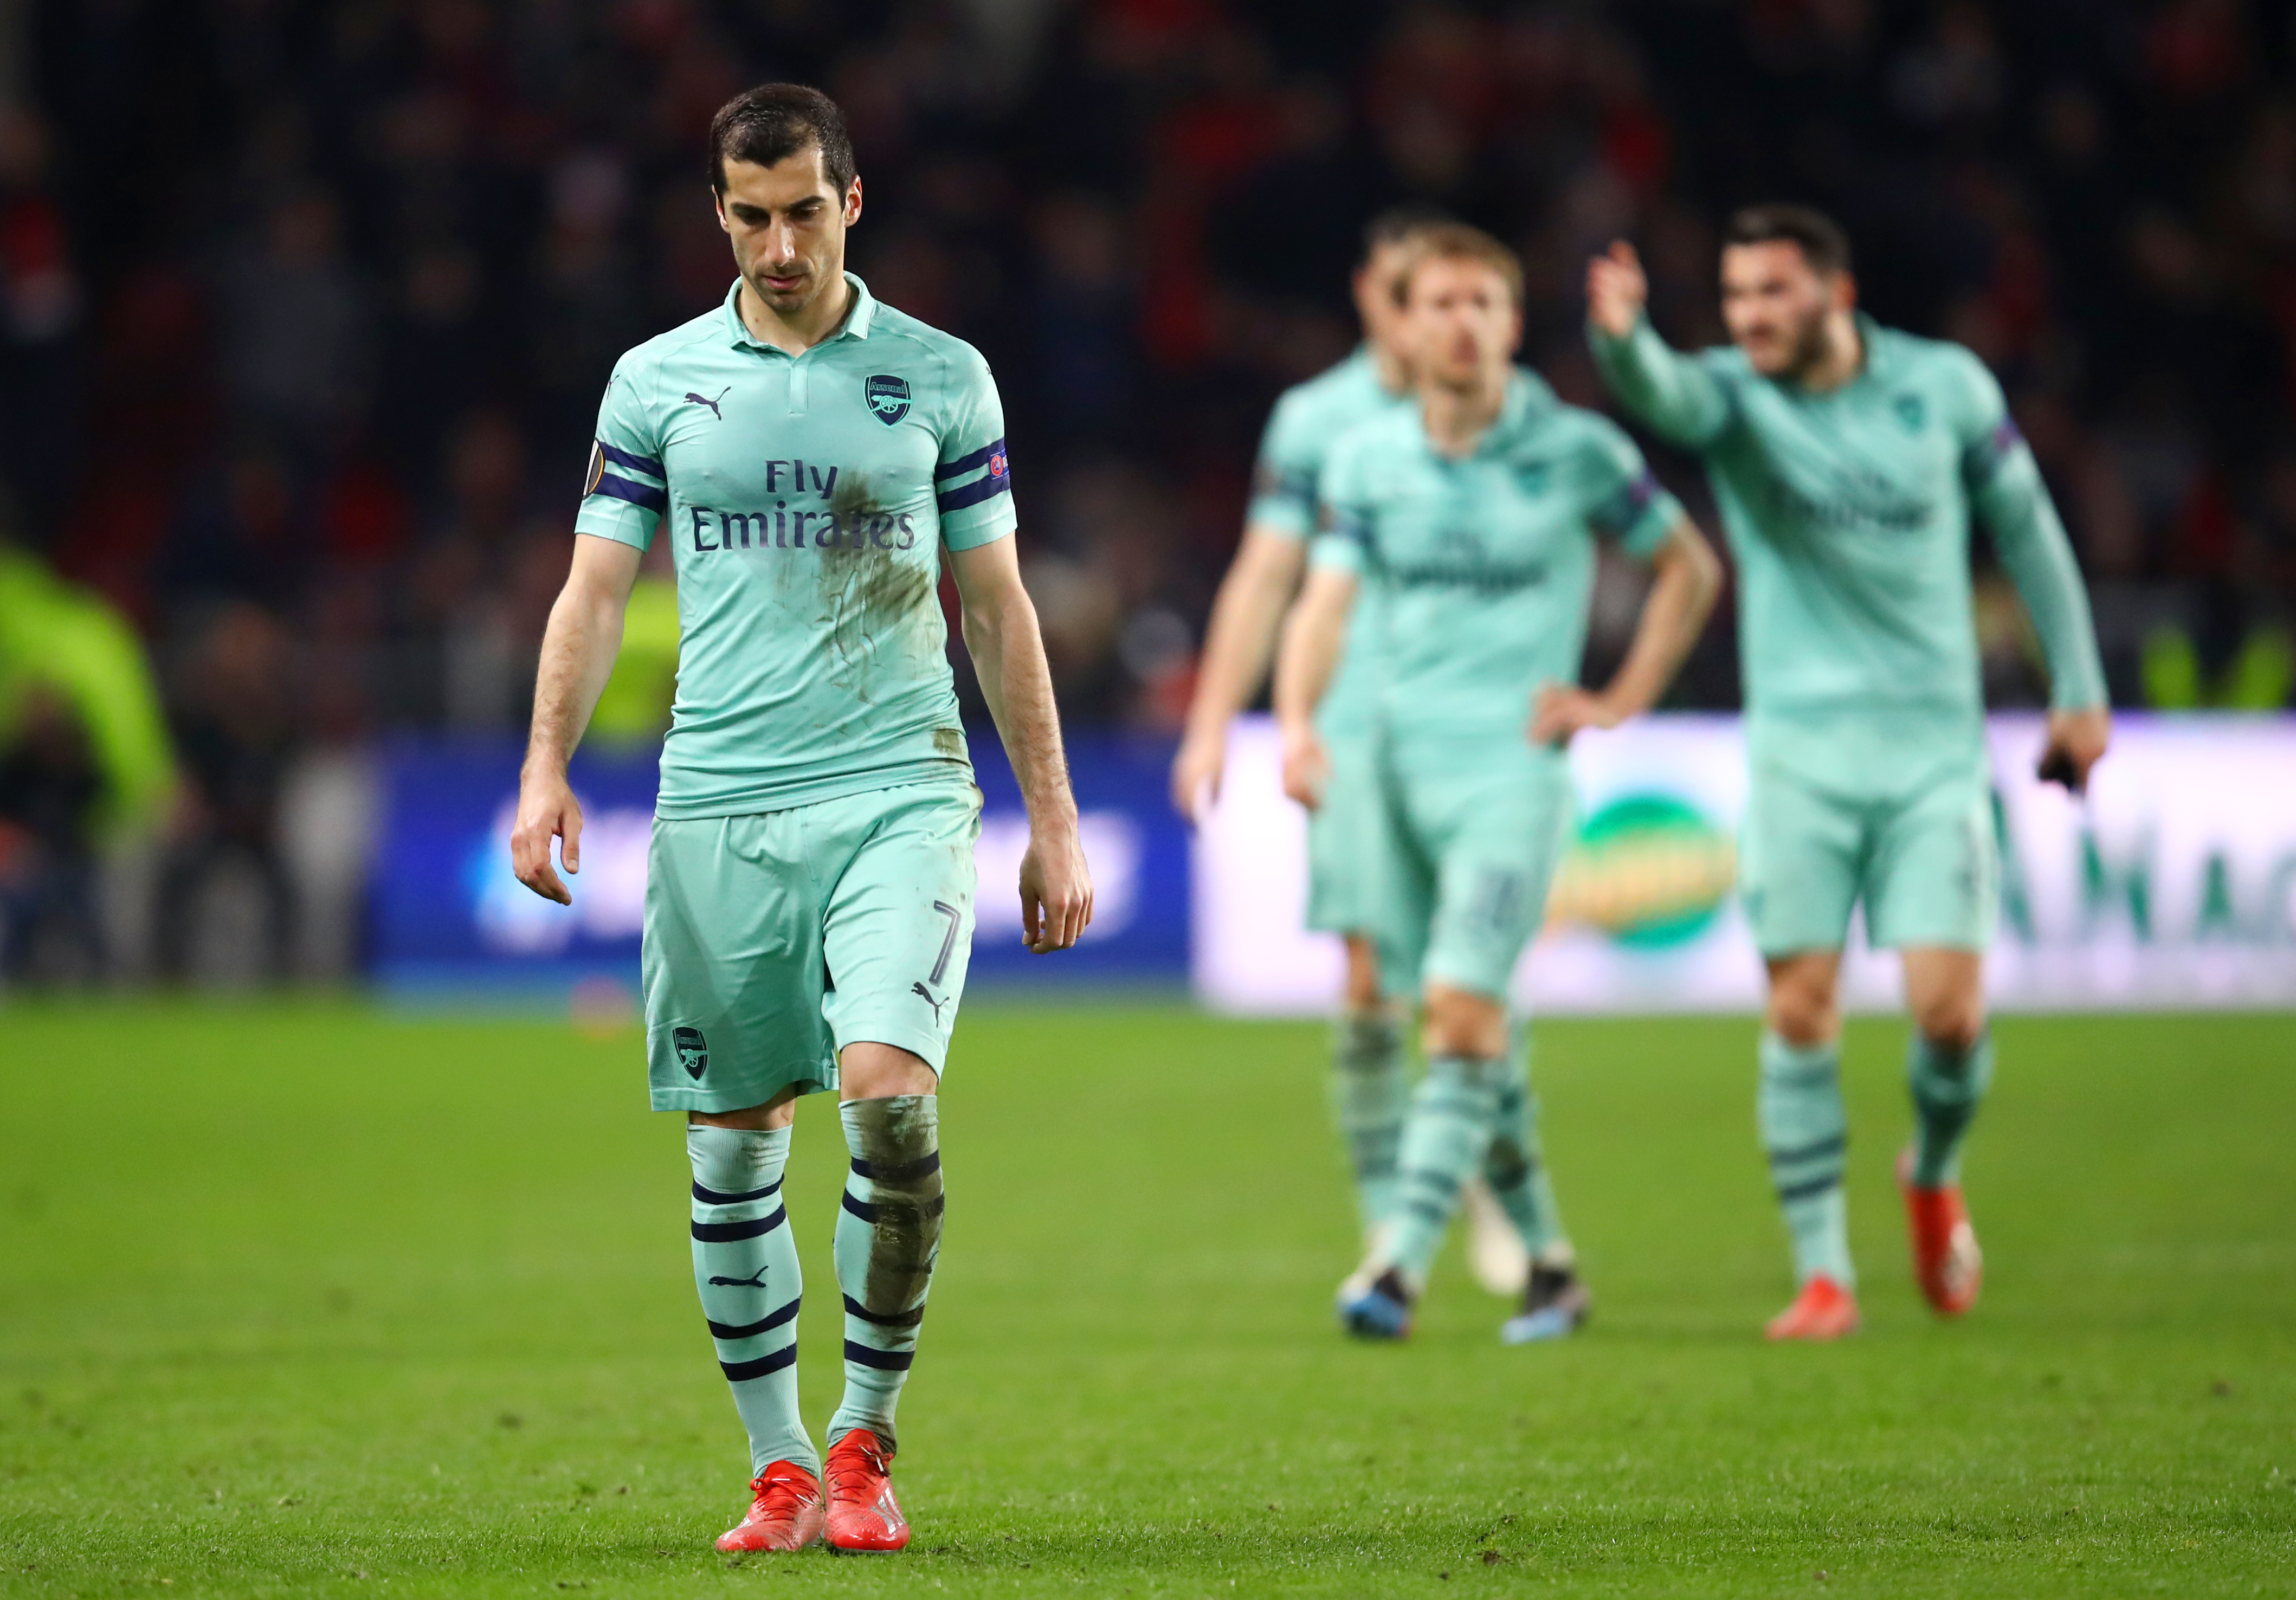 RENNES, FRANCE - MARCH 07:  Henrikh Mkhitaryan of Arsenal walks off the pitch after defeat in the UEFA Europa League Round of 16 First Leg match between Stade Rennais and Arsenal at Roazhon Park on March 07, 2019 in Rennes, France. (Photo by Julian Finney/Getty Images)